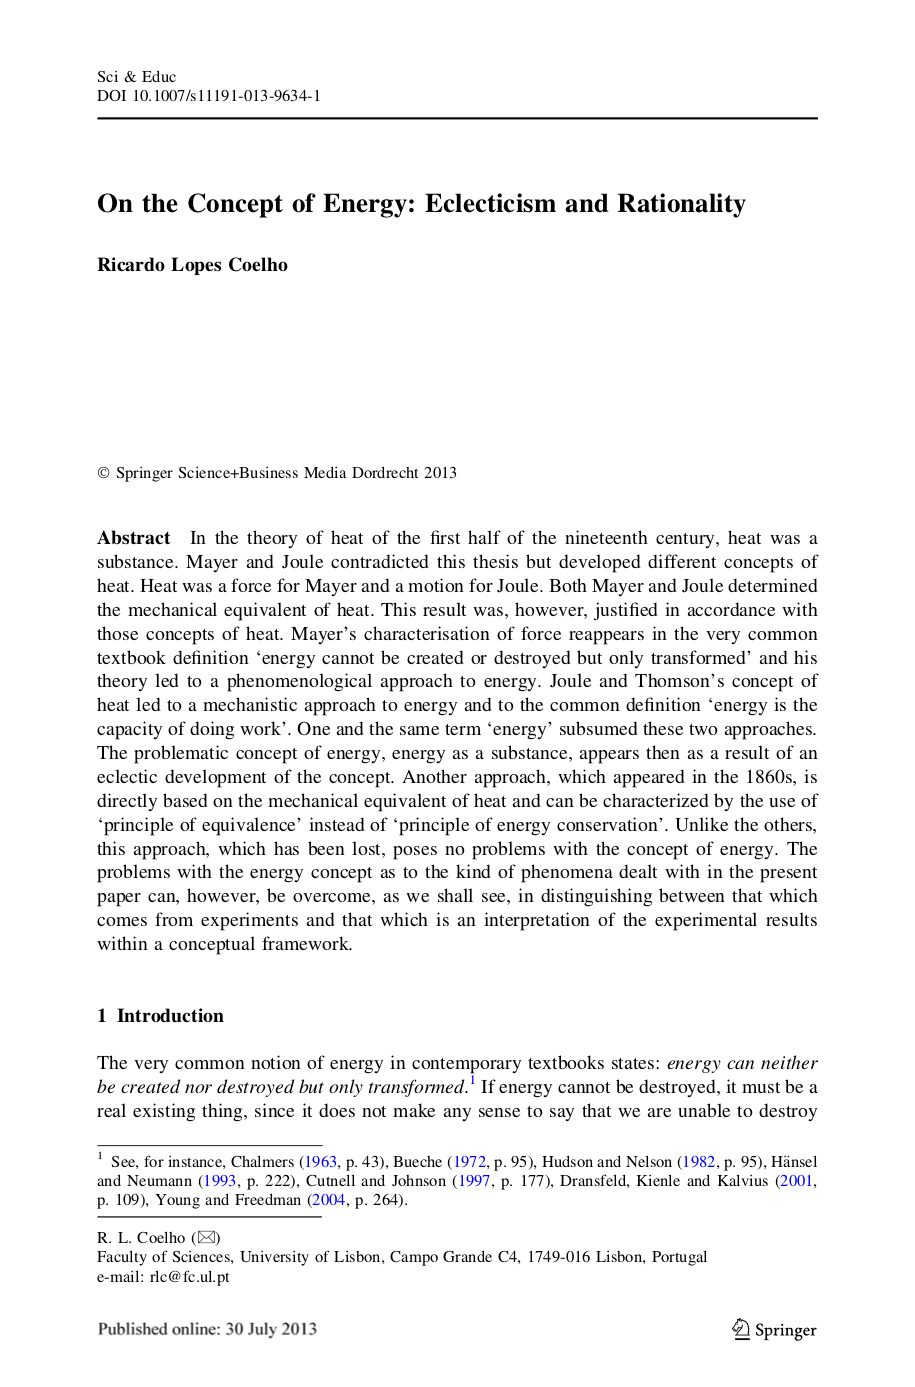 On the Concept of Energy: Eclecticism and Rationality, Capa